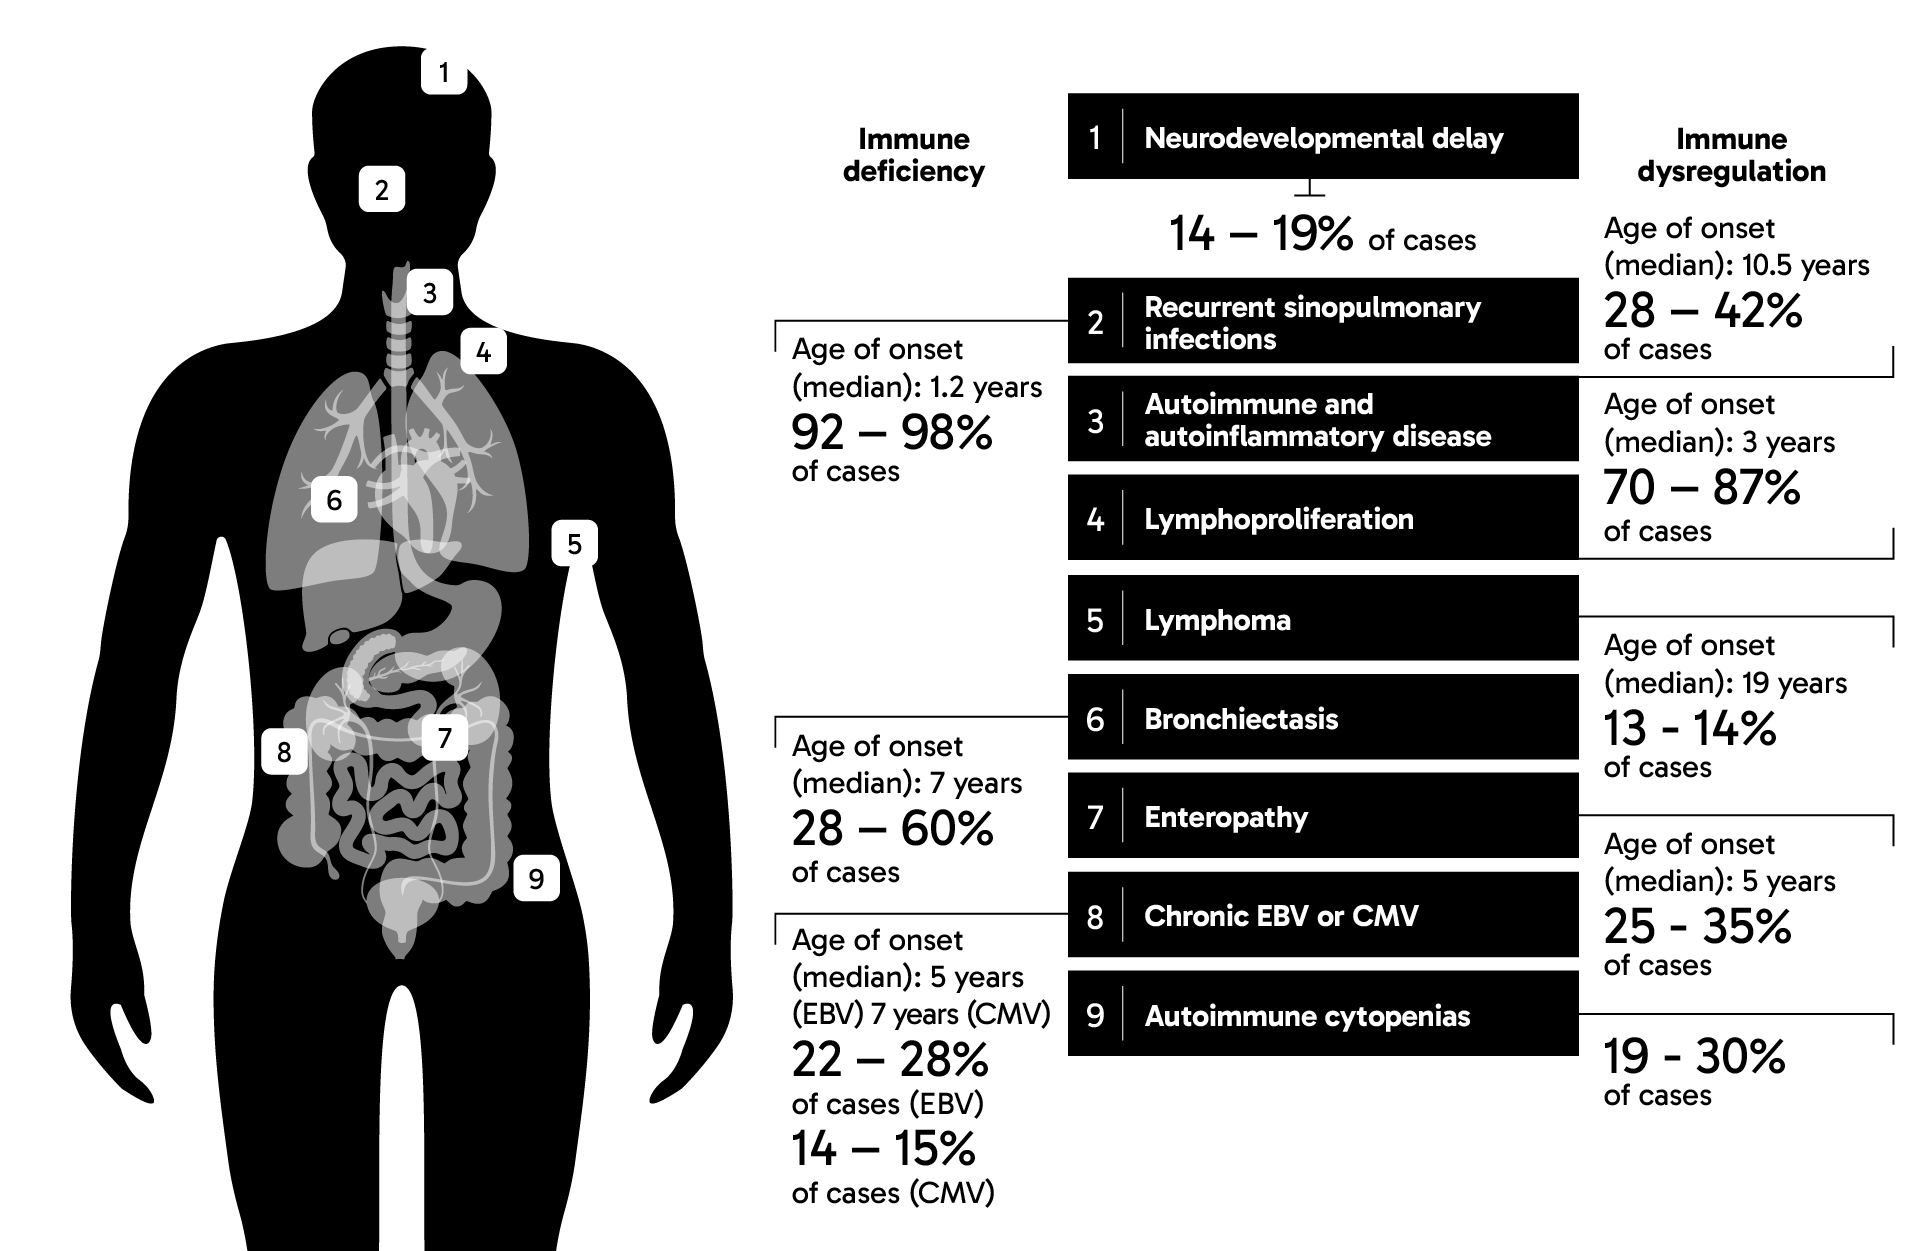 Black and white infographic with a human figure with numbered pointers highlighting different body parts typically affected by APDS on the left and a list of APDS clinical features are shown on the right along with percentage of cases and median age of onset of each feature: The head of the figure is pinpointed 1 to show that neurodevelopment delay occurs in 14-19% of APDS cases. A number of clinical features of APDS are listed as resulting from immune deficiency: • The figure’s face is pinpointed 2 to show that severe, recurrent sinopulmonary infections occur in 92-98% of APDS cases, with a median age of onset of 1.2 years • The lungs are pinpointed 6 to show that bronchiectasis occurs in 28-60% of cases, with a mean age of onset of 7 years • The abdomen is pinpointed 8 to show that chronic EBV infections occur in 22-28% of APDS cases, with a median onset of 5 years, and chronic CMV infections occur in 14-15% of cases, with a median onset of 7 years Other APDS manifestations are listed as resulting from immune dysregulation, including: • The throat is pinpointed 3 to show that autoimmune and autoinflammatory disease occurs in 28-42% of cases, with a median age of onset of 10.5 years • The upper chest is pinpointed 4 to show that lymphoproliferation occurs in 70-87% of cases, with a median onset of 3 years • The armpit is pinpointed 5 to show that lymphoma occurs in 13-14% of cases, with a median age of onset of 19 years • The intestines are pinpointed 7 to show that enteropathy occurs in 25-35% of cases, with a median age of onset of 5 years • The lower abdomen is pinpointed 9 to show that autoimmune cytopenias occur in 19-30% of cases